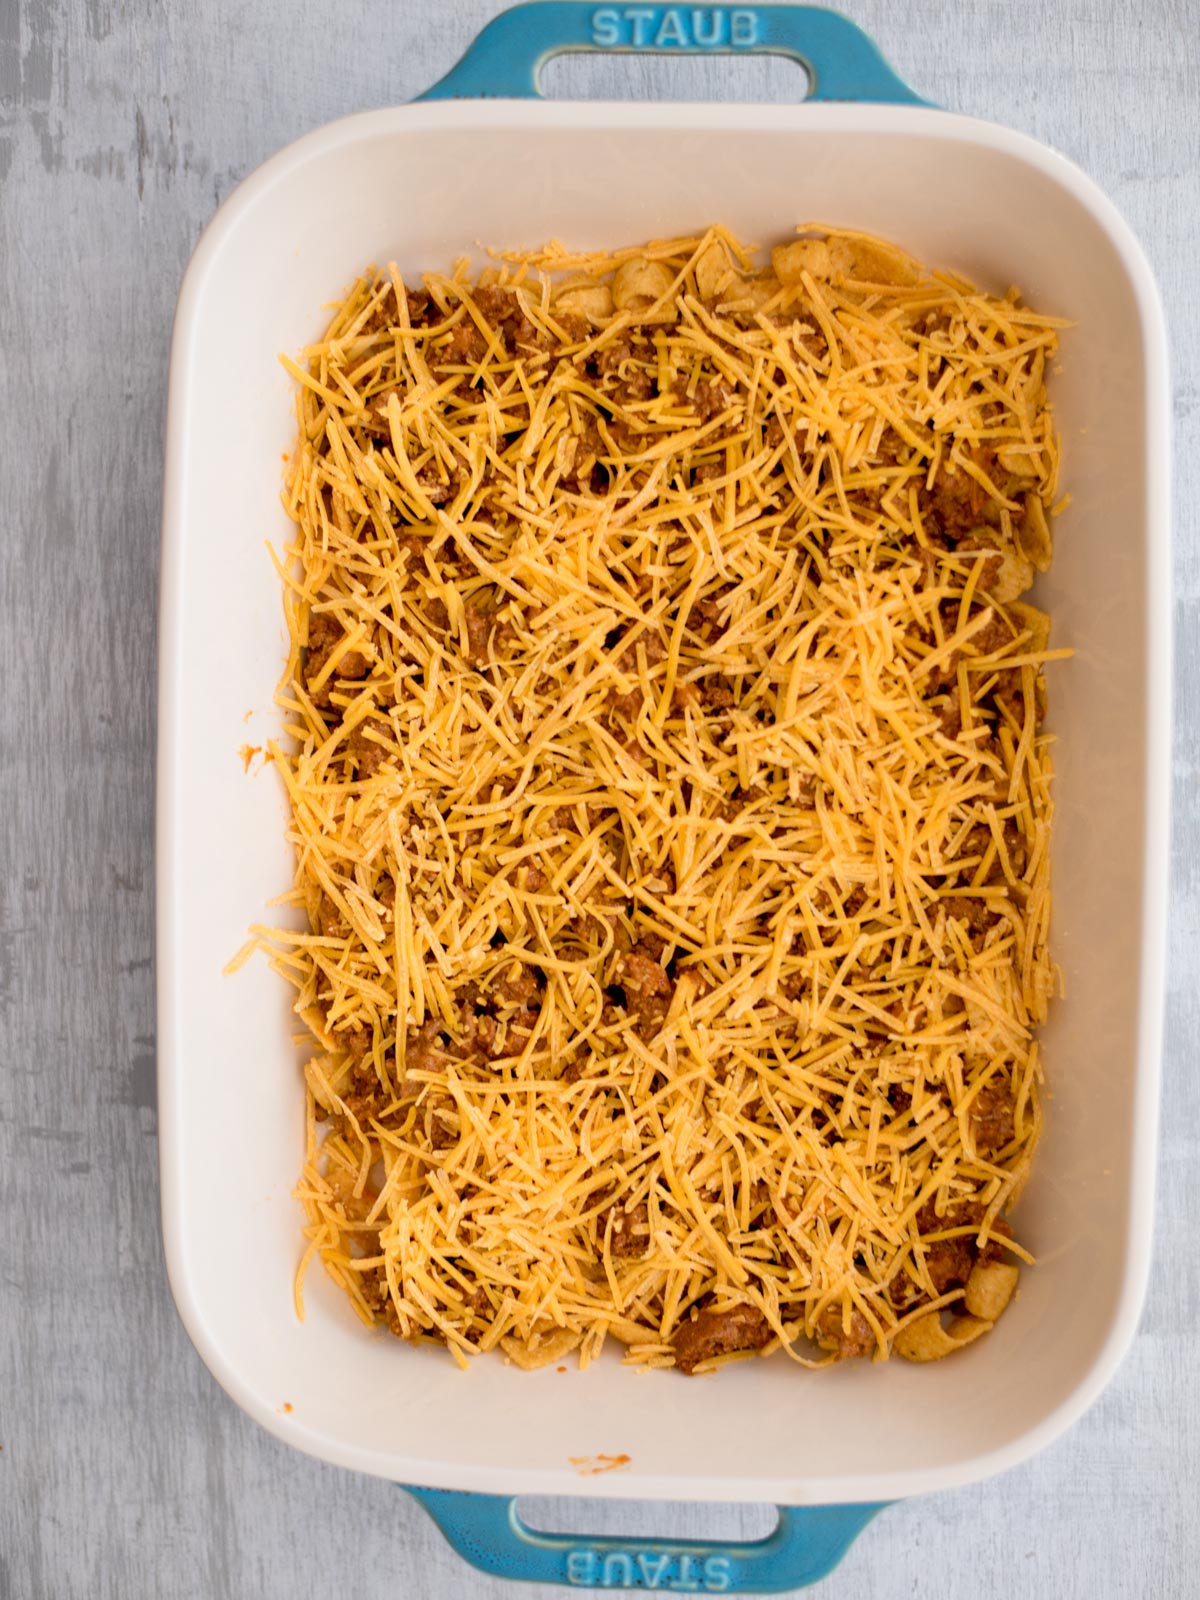 Shredded cheese topped over the fritos and seasoned ground beef.